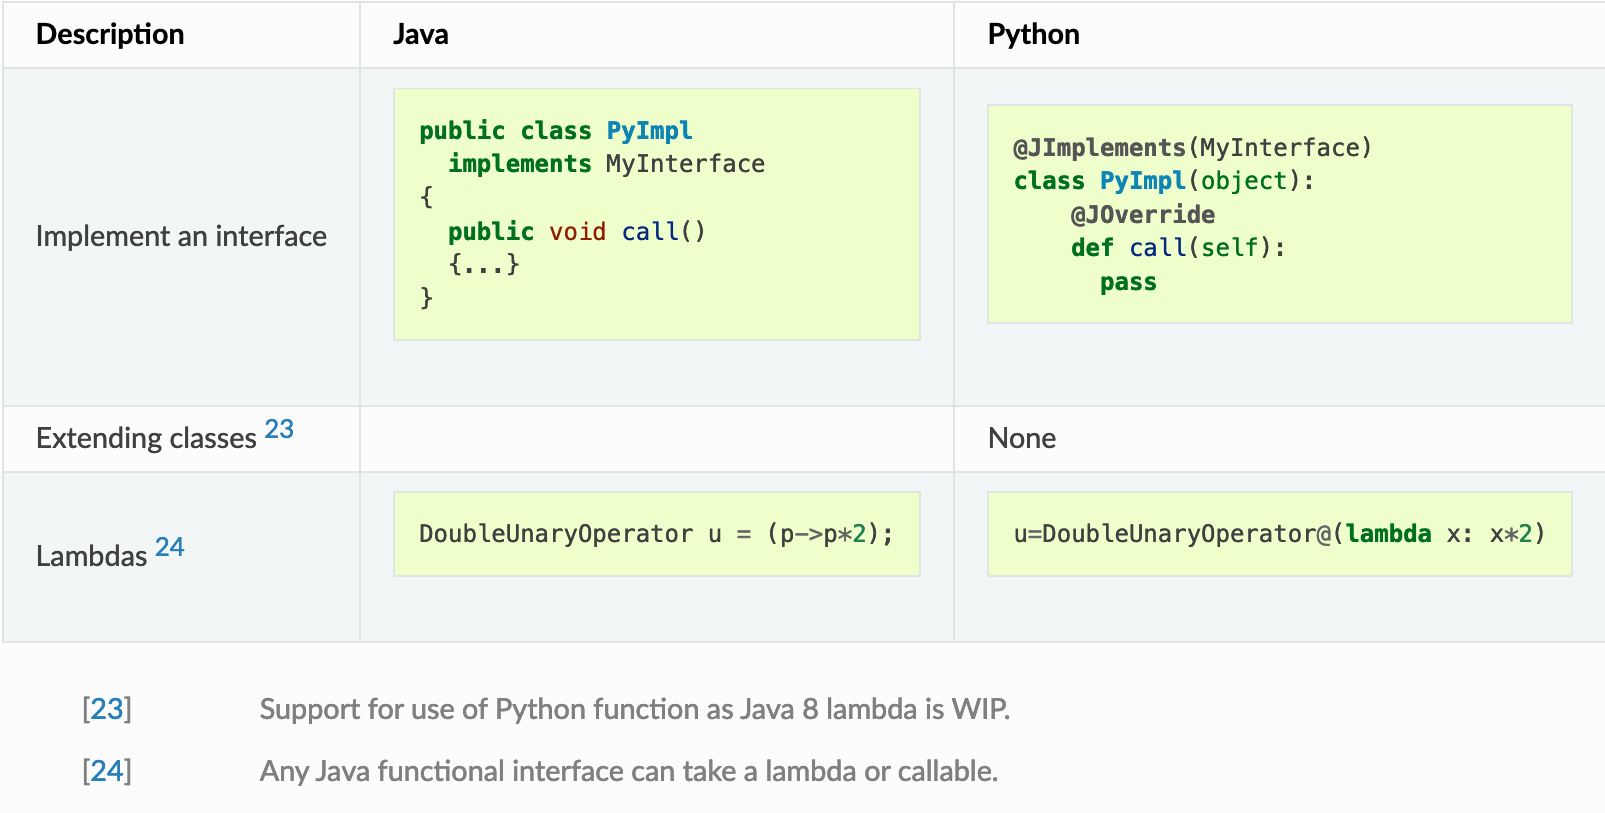 Implementing Java interfaces in Python